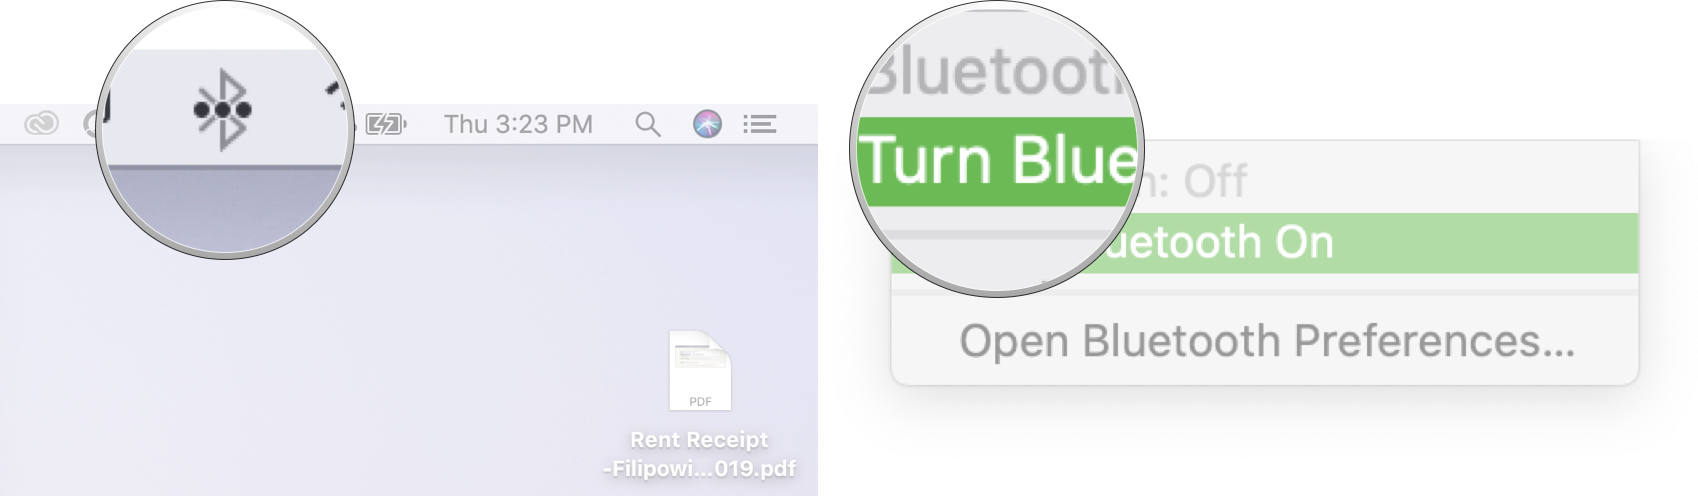 Turn on Bluetooth on Mac: Click the Bluetooth symbol in the Menubar and then click turn Bluetooth on